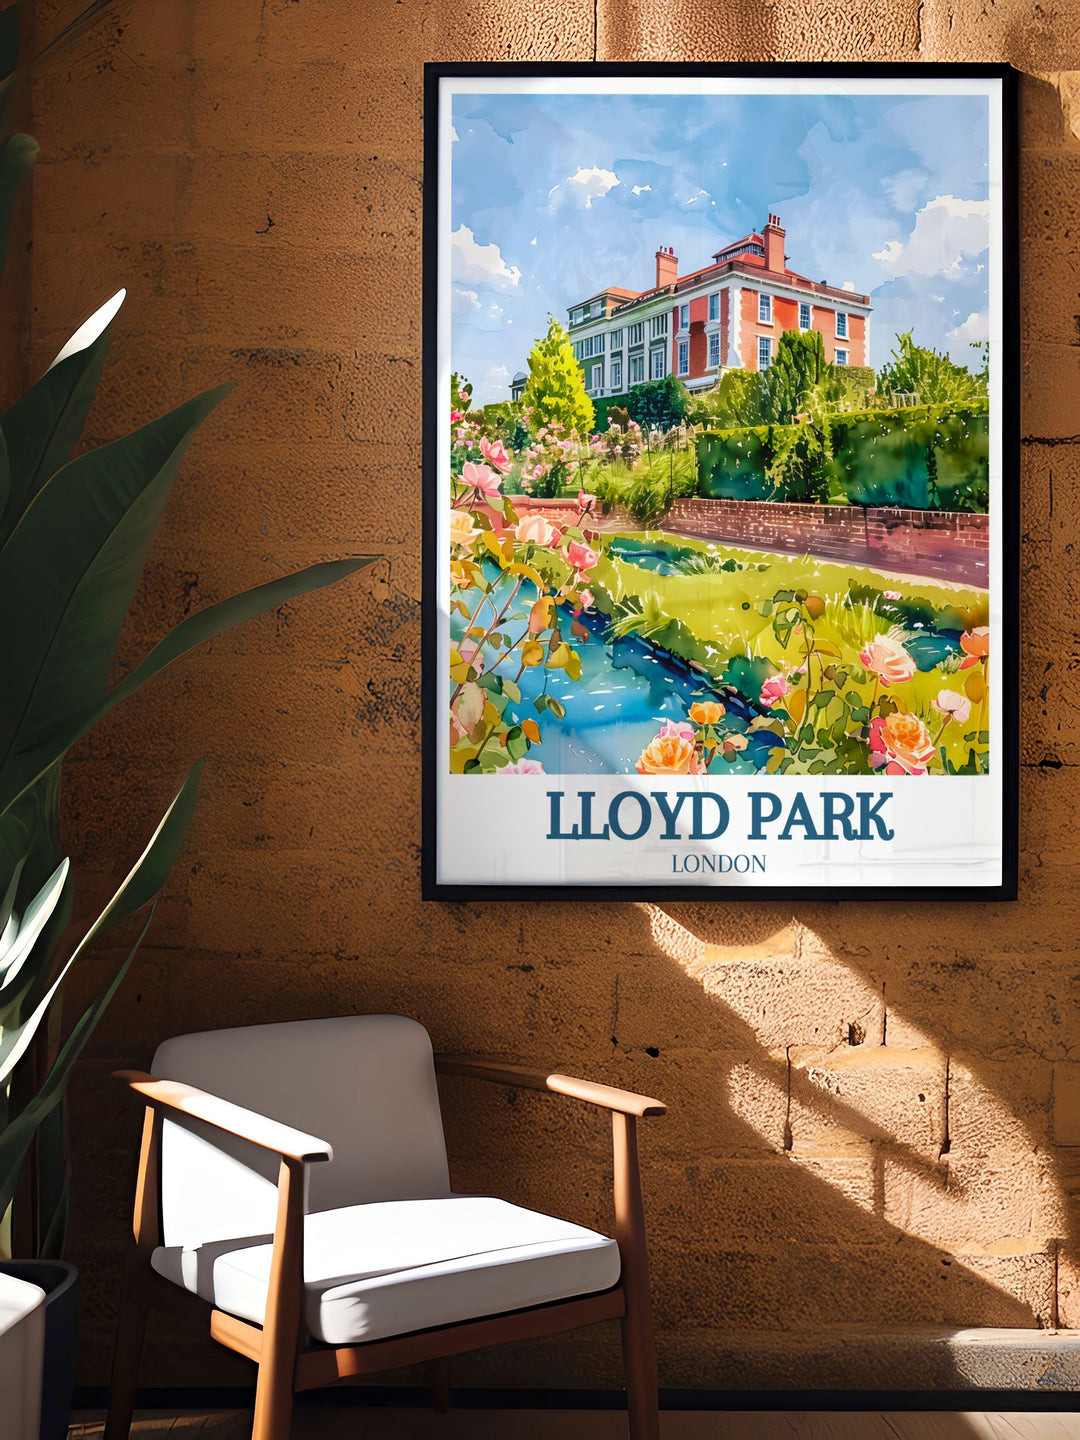 Rose garden prints featuring Lloyd Park at William Morris gallery in Walthamstow London. A perfect addition to your travel art collection. Celebrate the elegance and history of Londons parks with this stunning piece.